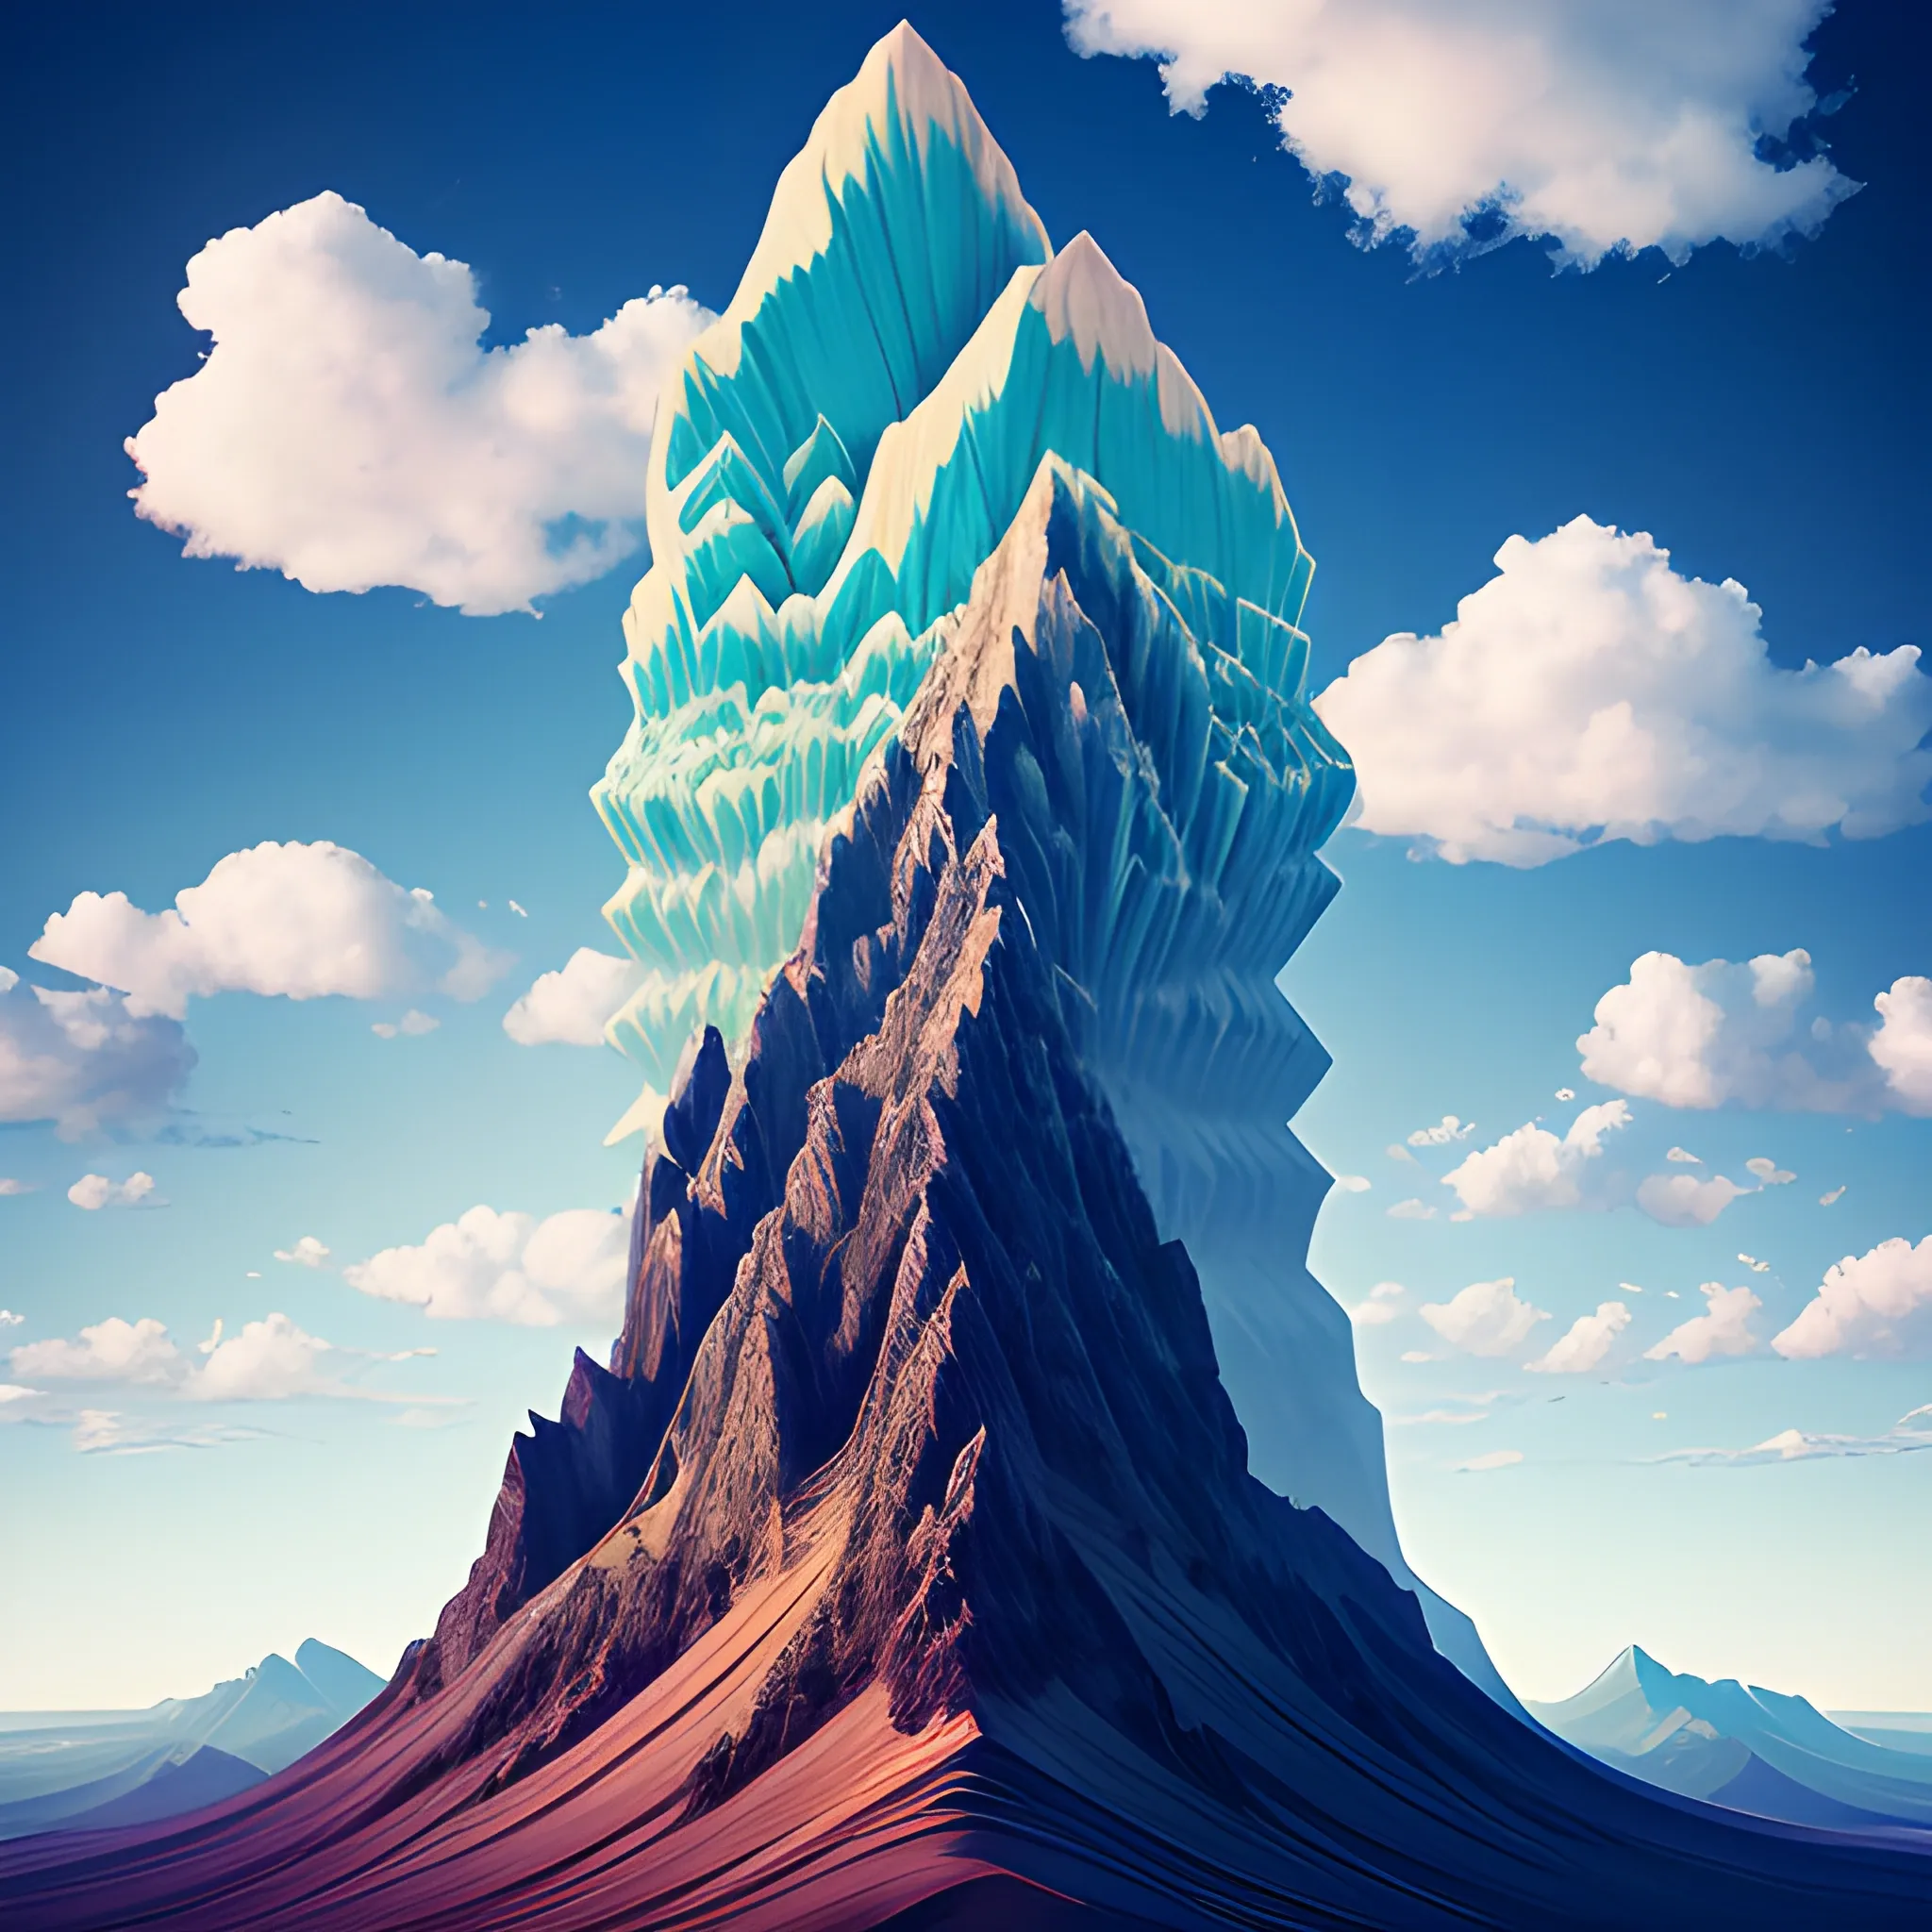 vertical arcitektical forms
mountin landscape,
athmospher, clouds, Trippy